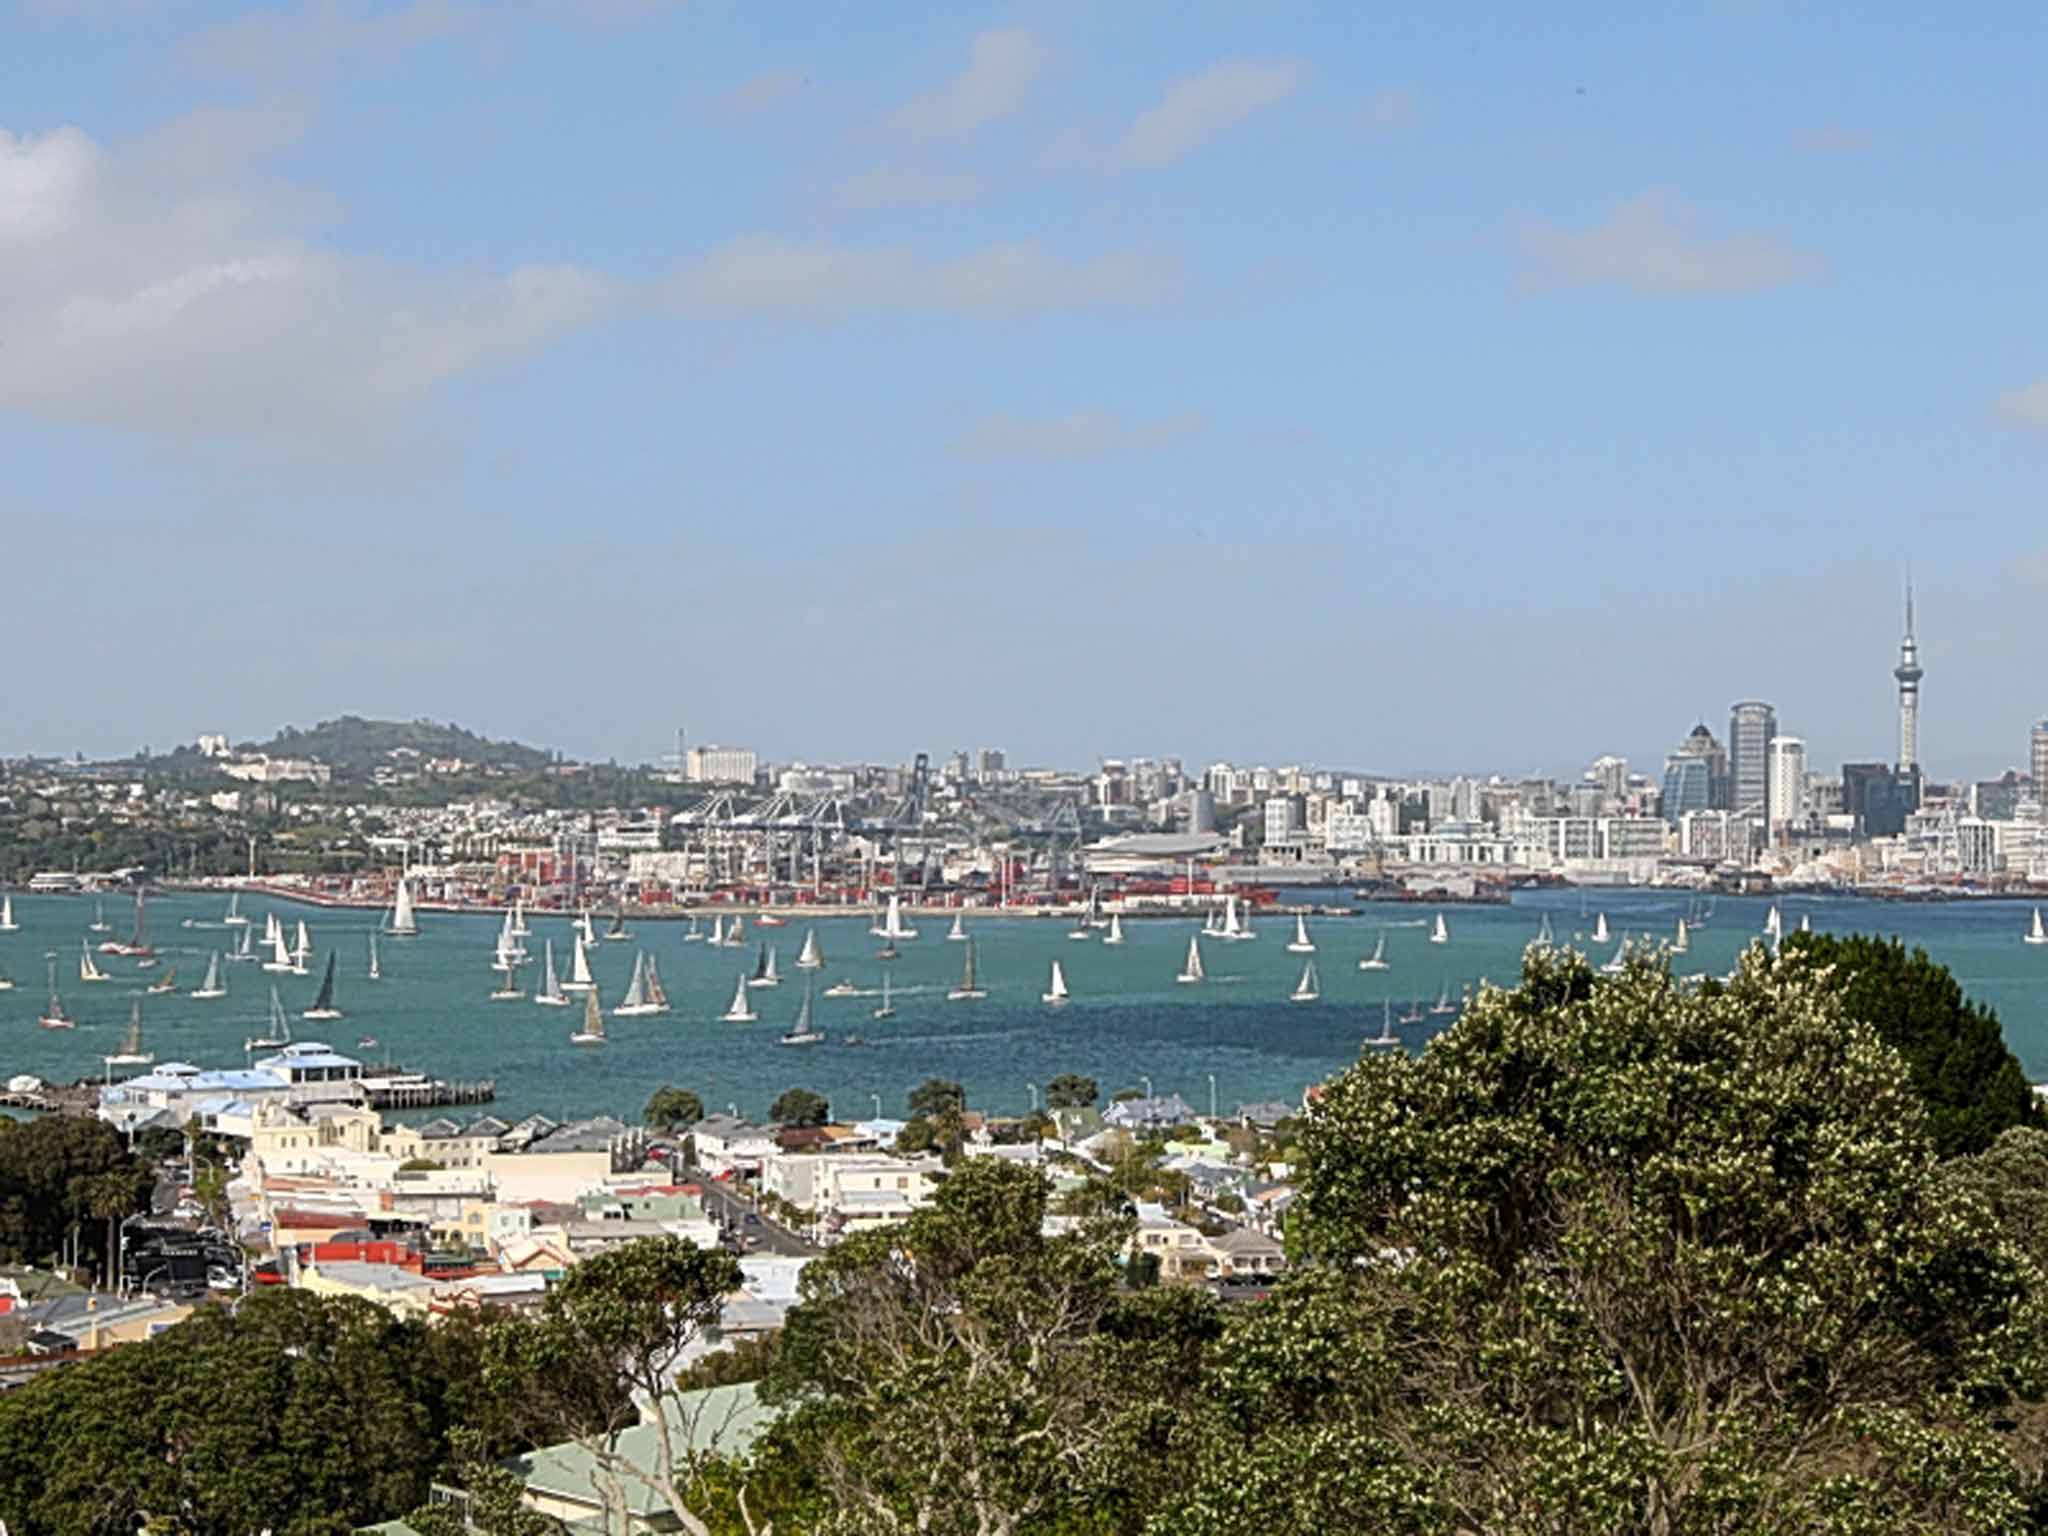 Sails pitch: yachts in Waitemata Harbour